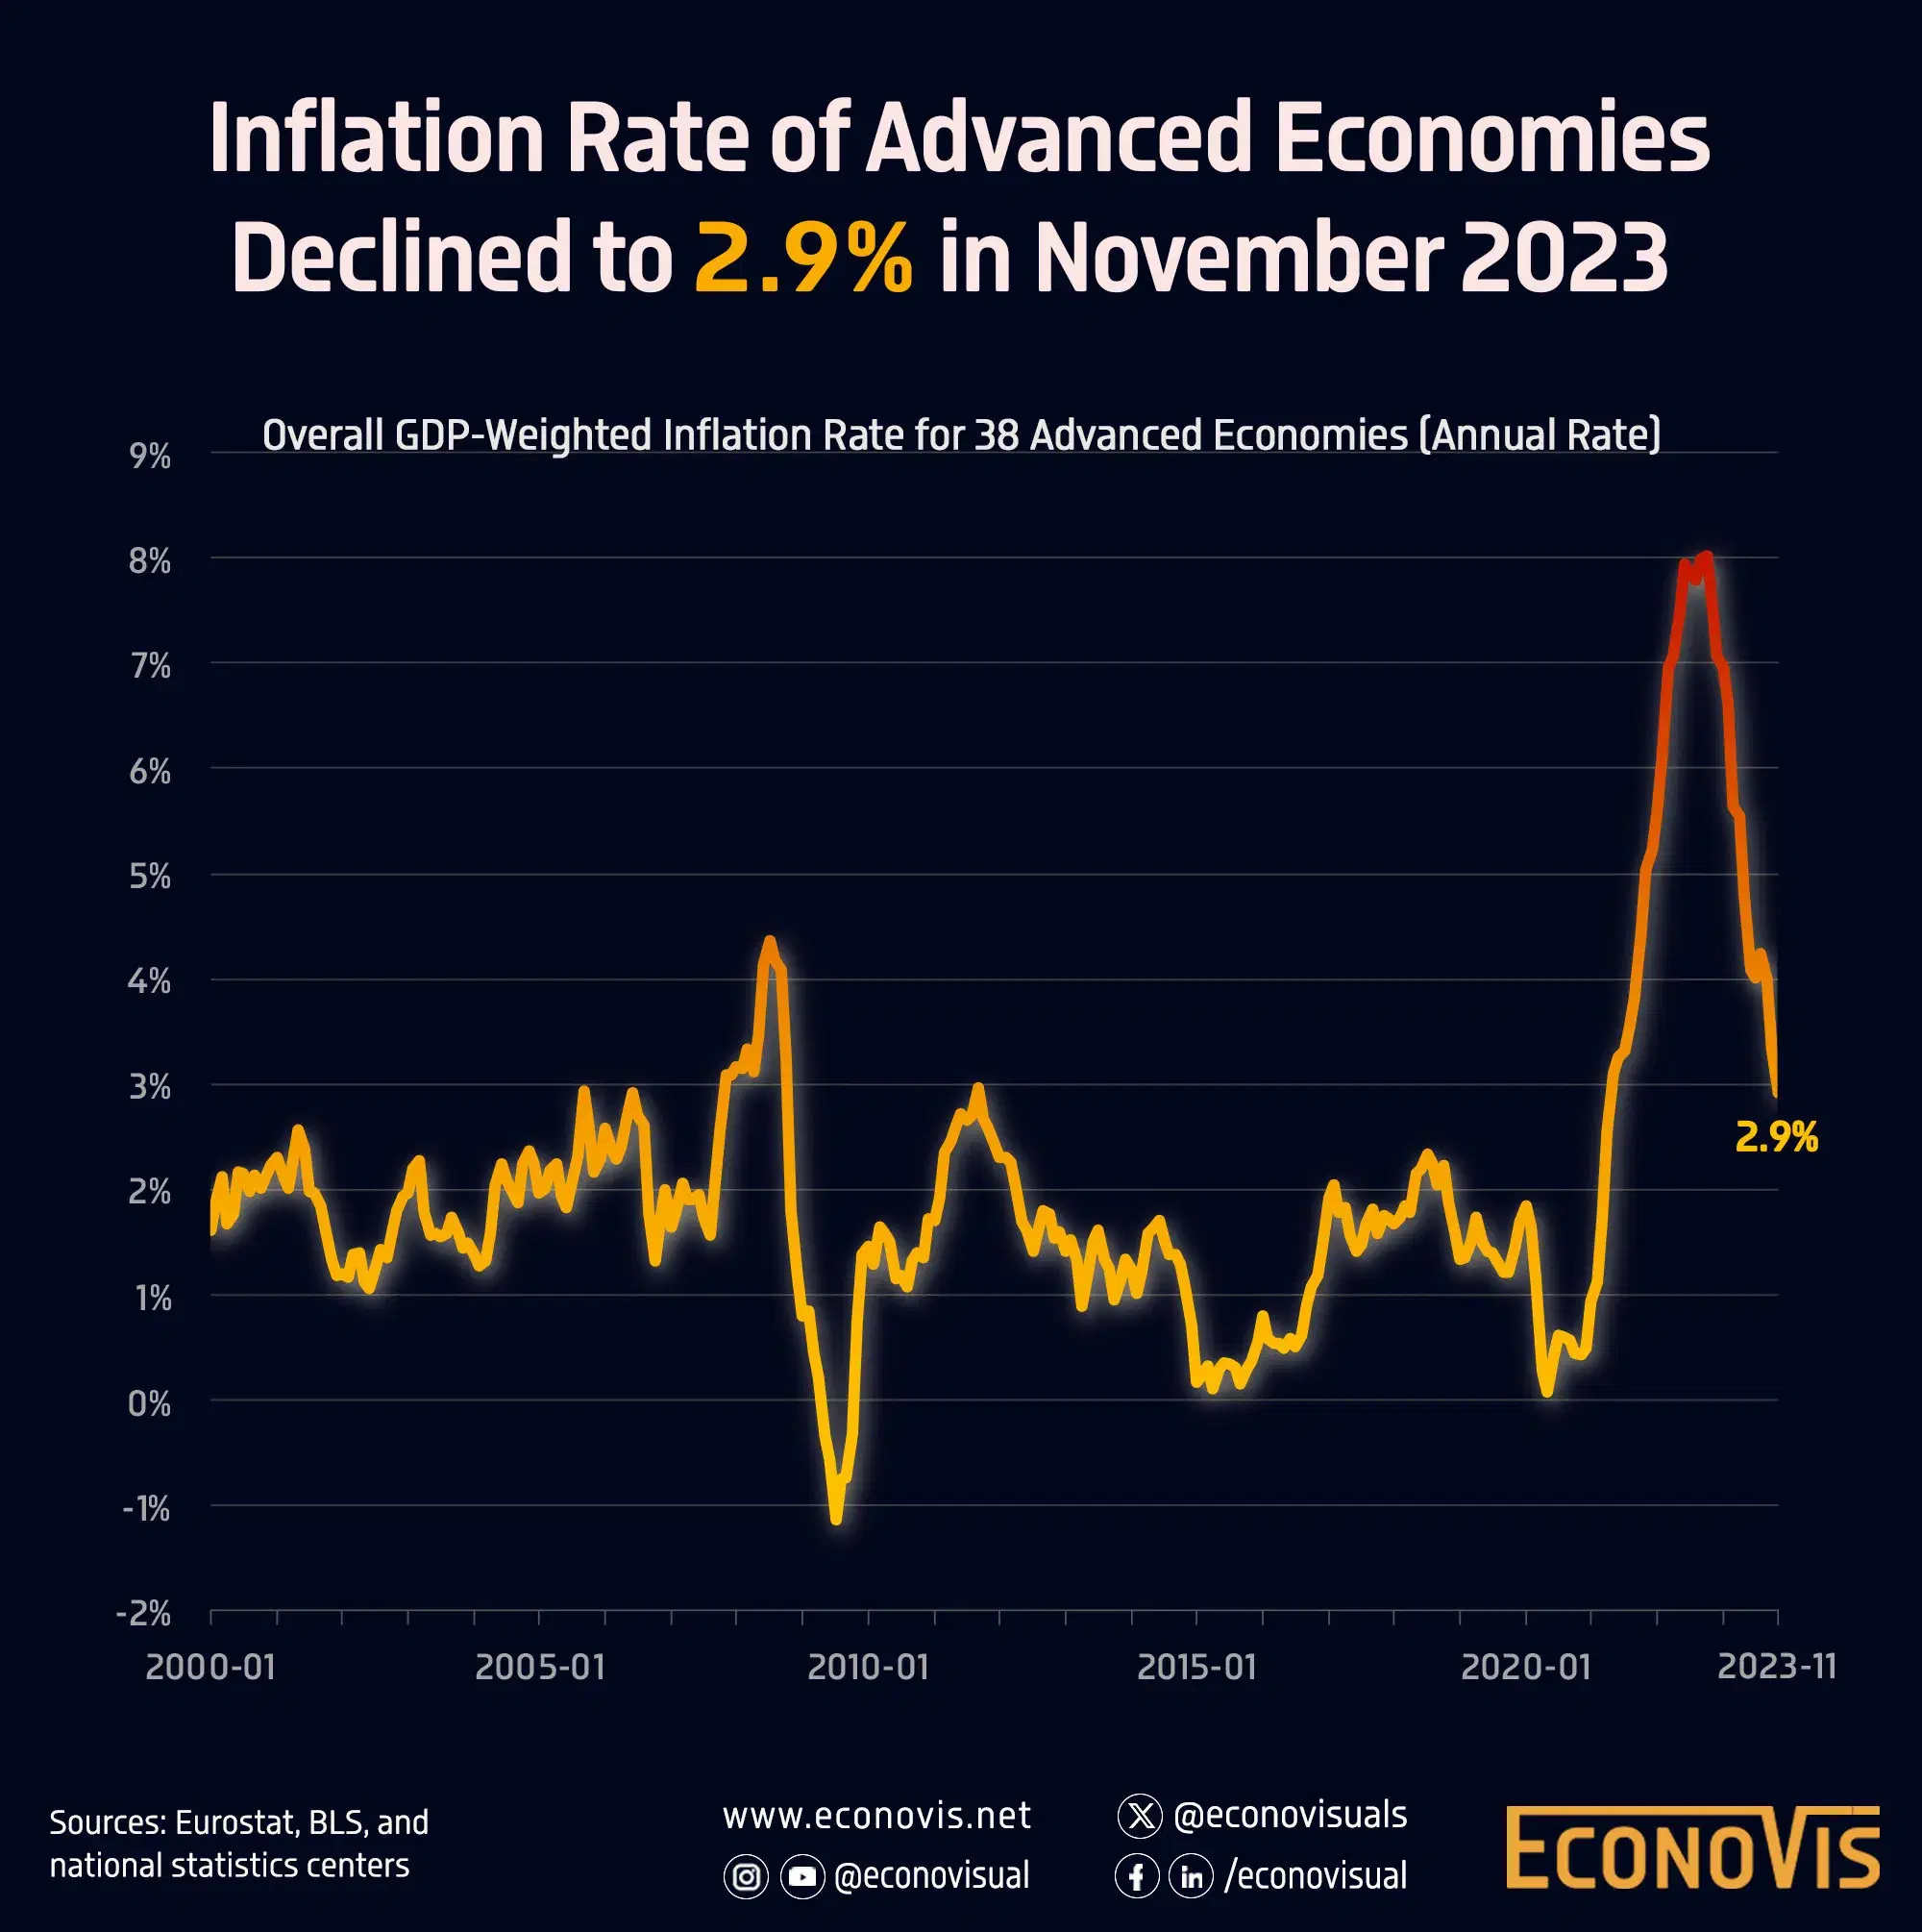 Inflation Rate of Advanced Economies Declined to 2.9% in November 2023